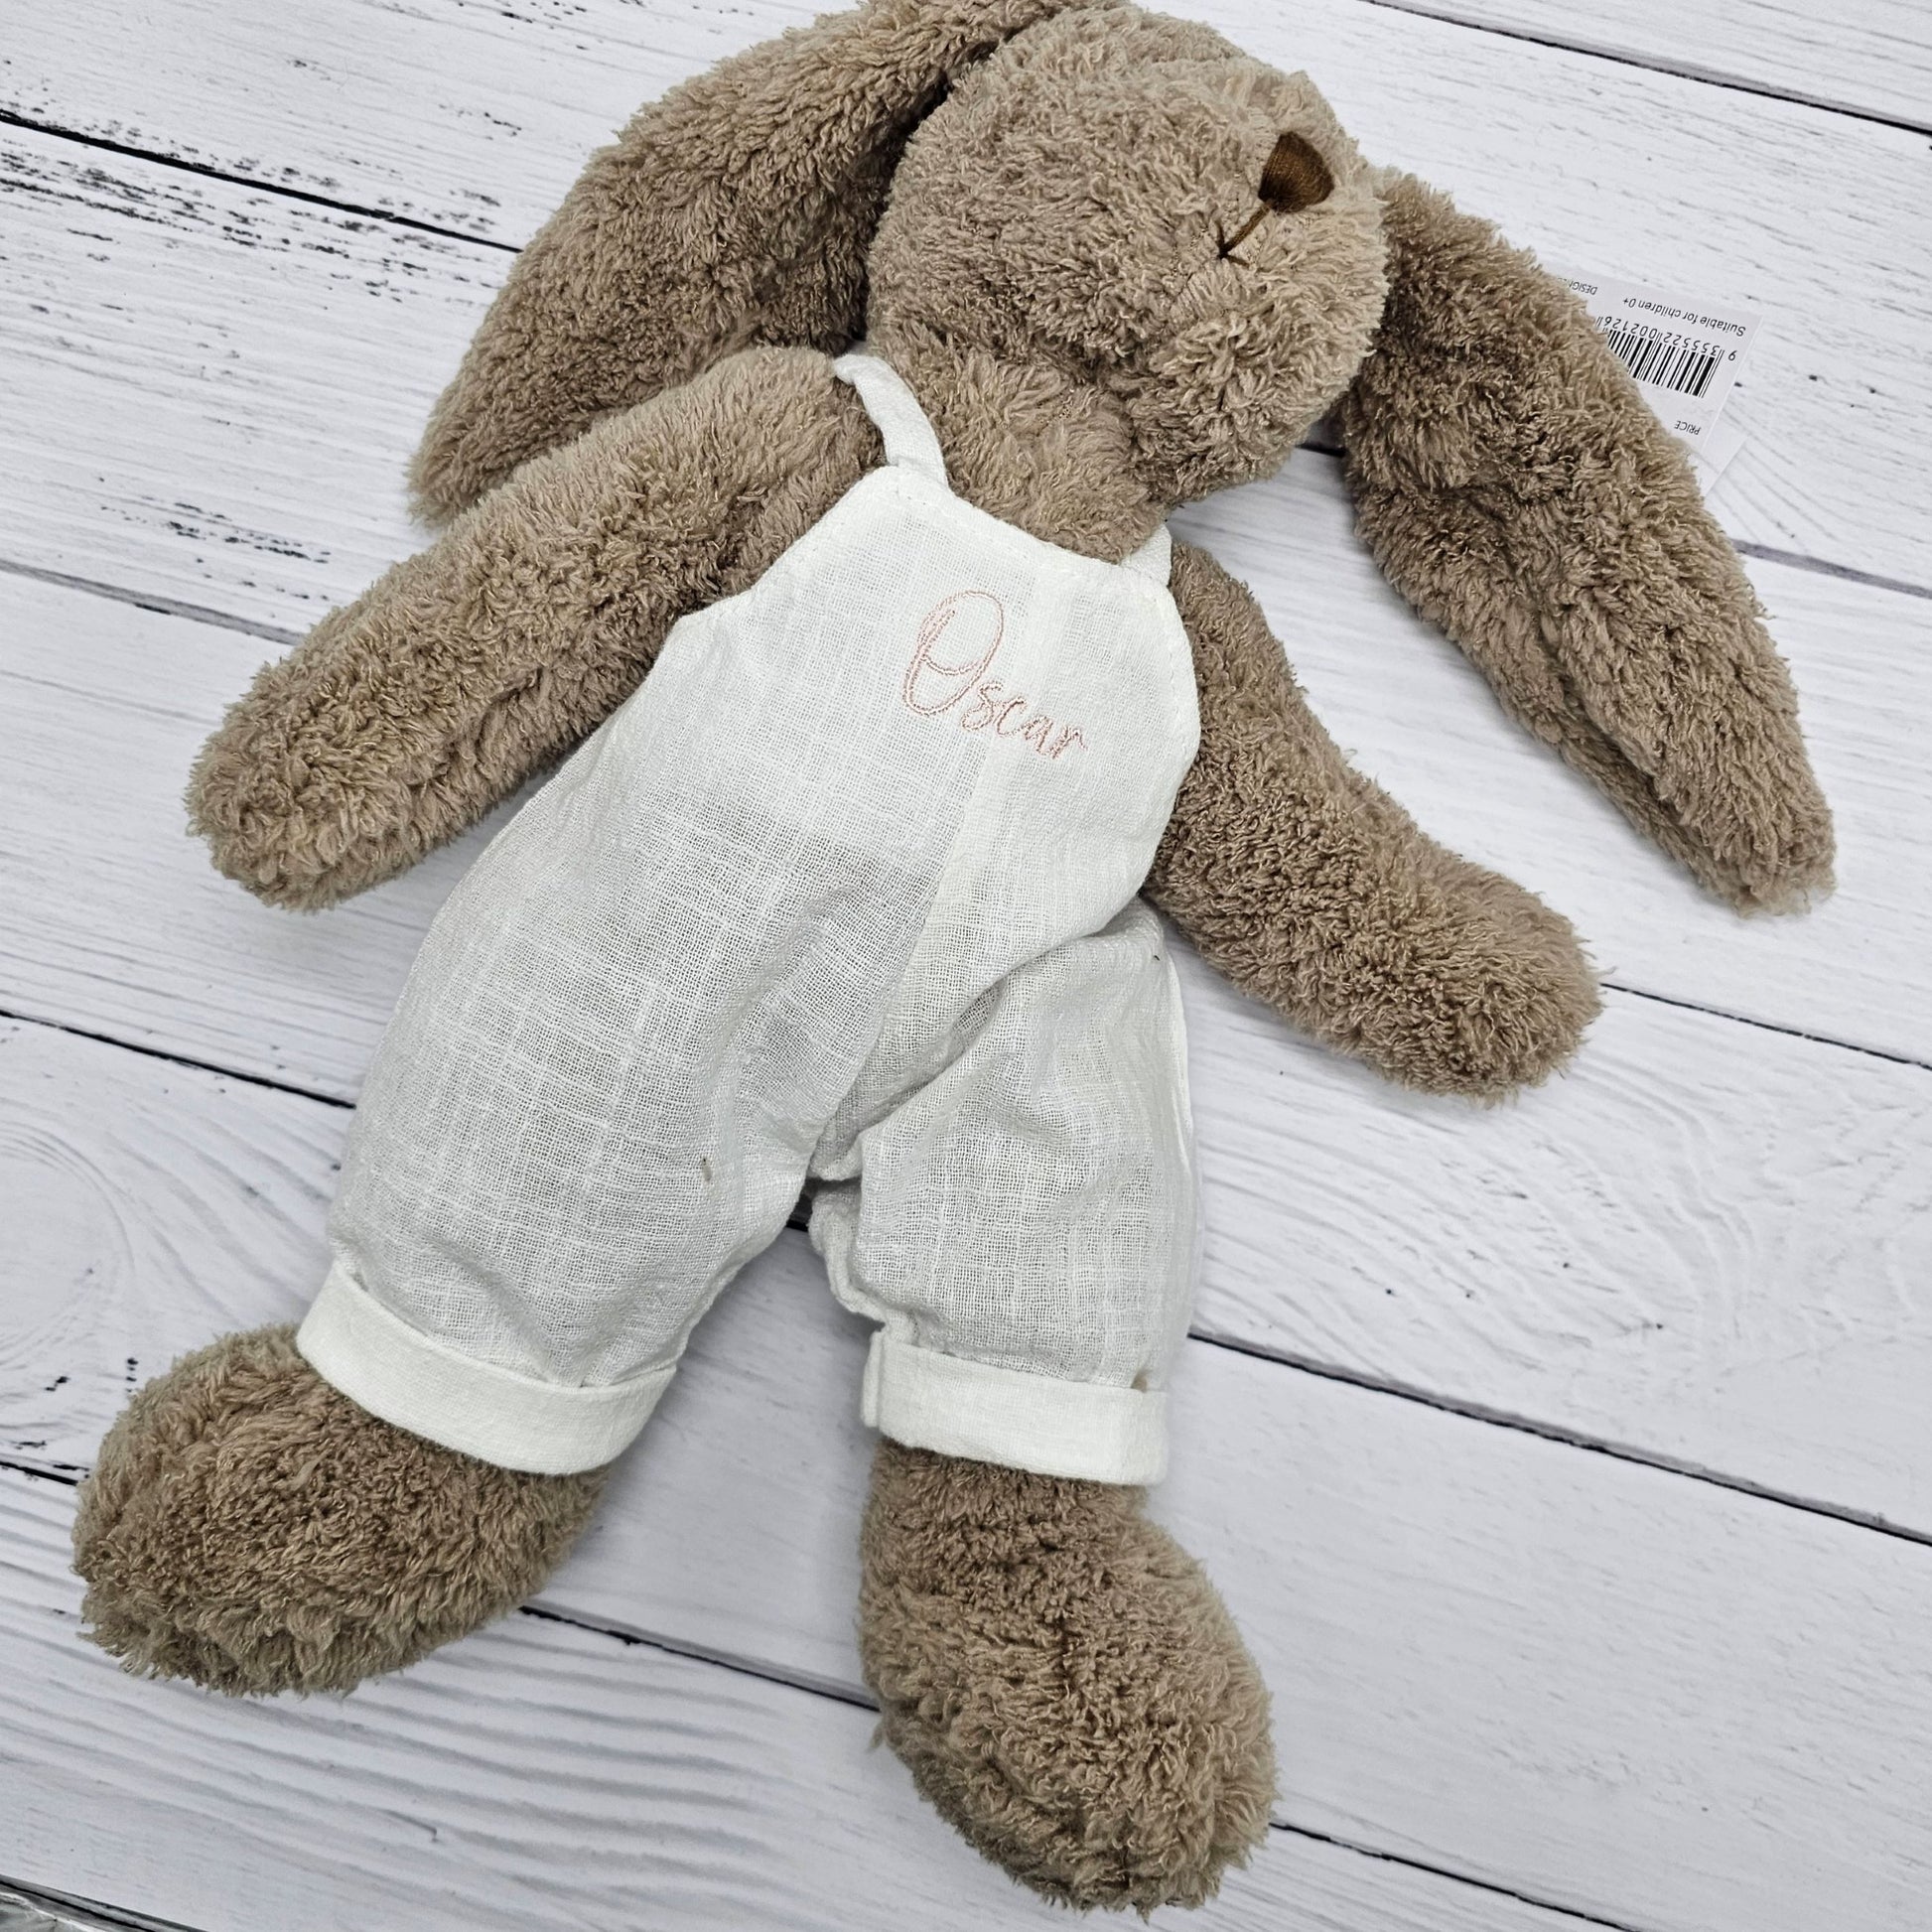 White Mr Honey Bunny personalised with child or baby name embroidery perfect for easter gift